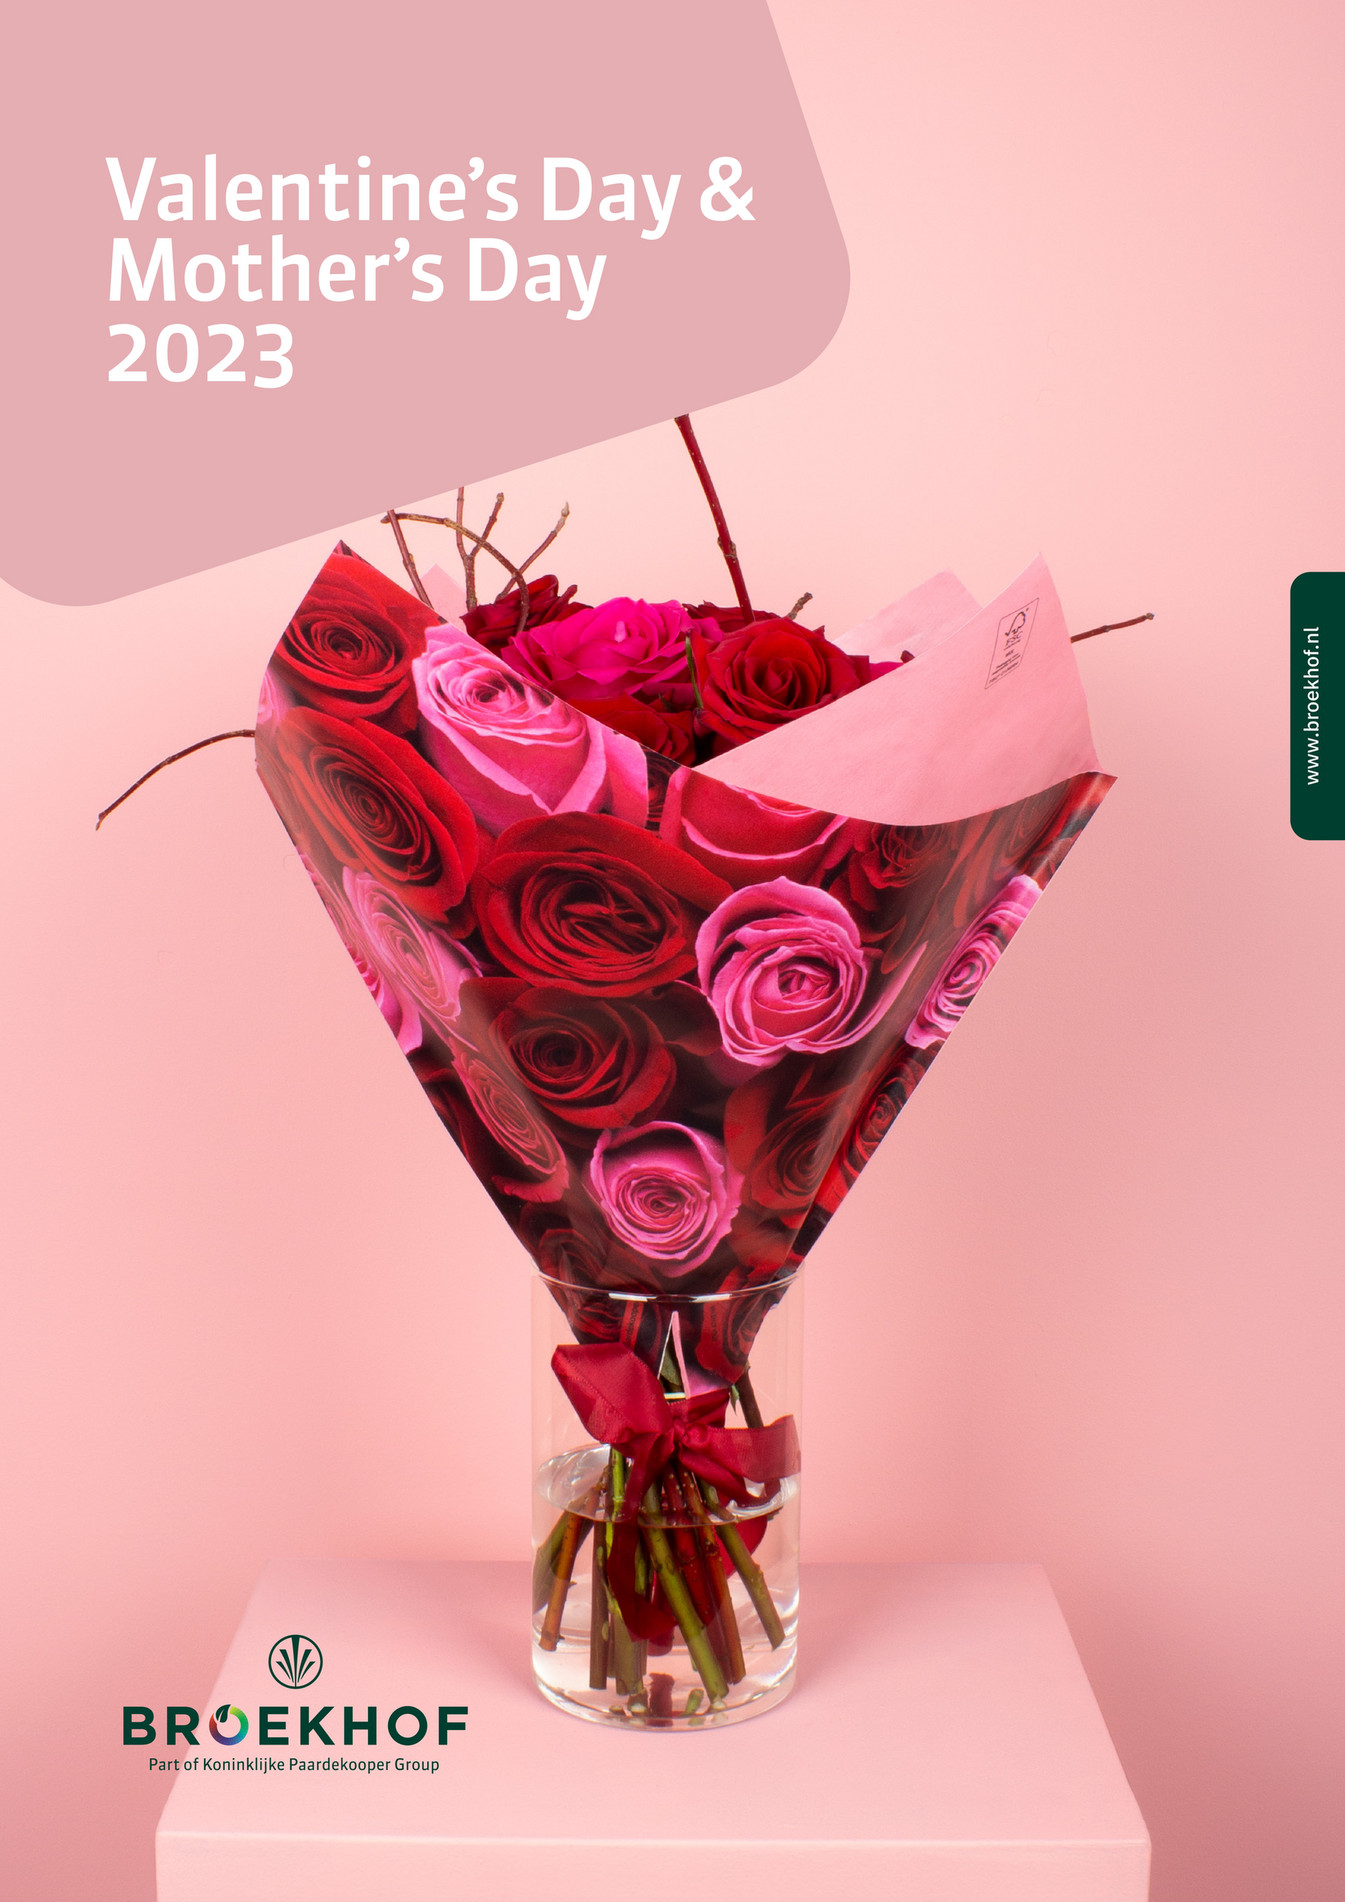 broekhof-brochure-valentine-s-day-and-mother-s-day-2023-page-1